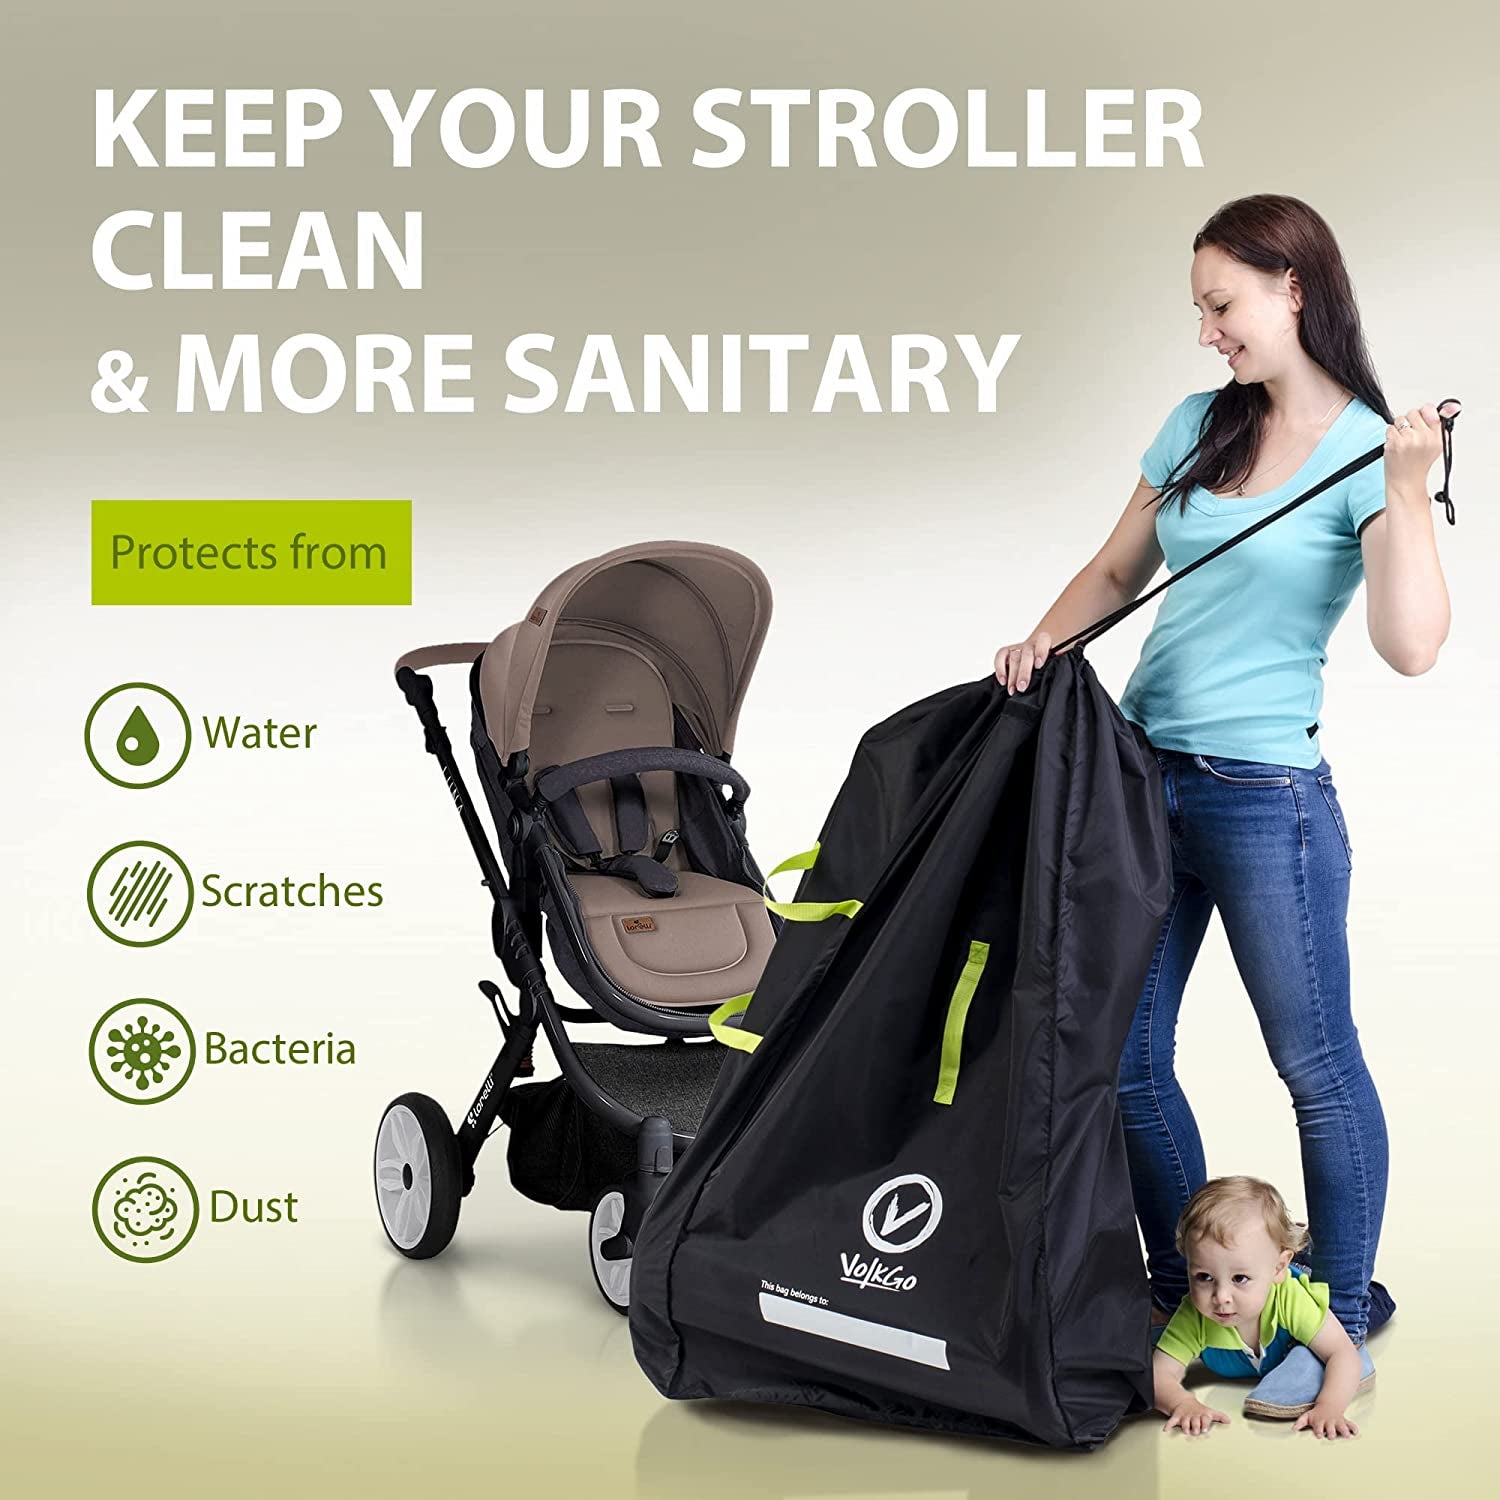 VolkGo Premium Quality Durable Stroller Bag for Airplane - Standard or Double/Dual Stroller Gate Check Bag